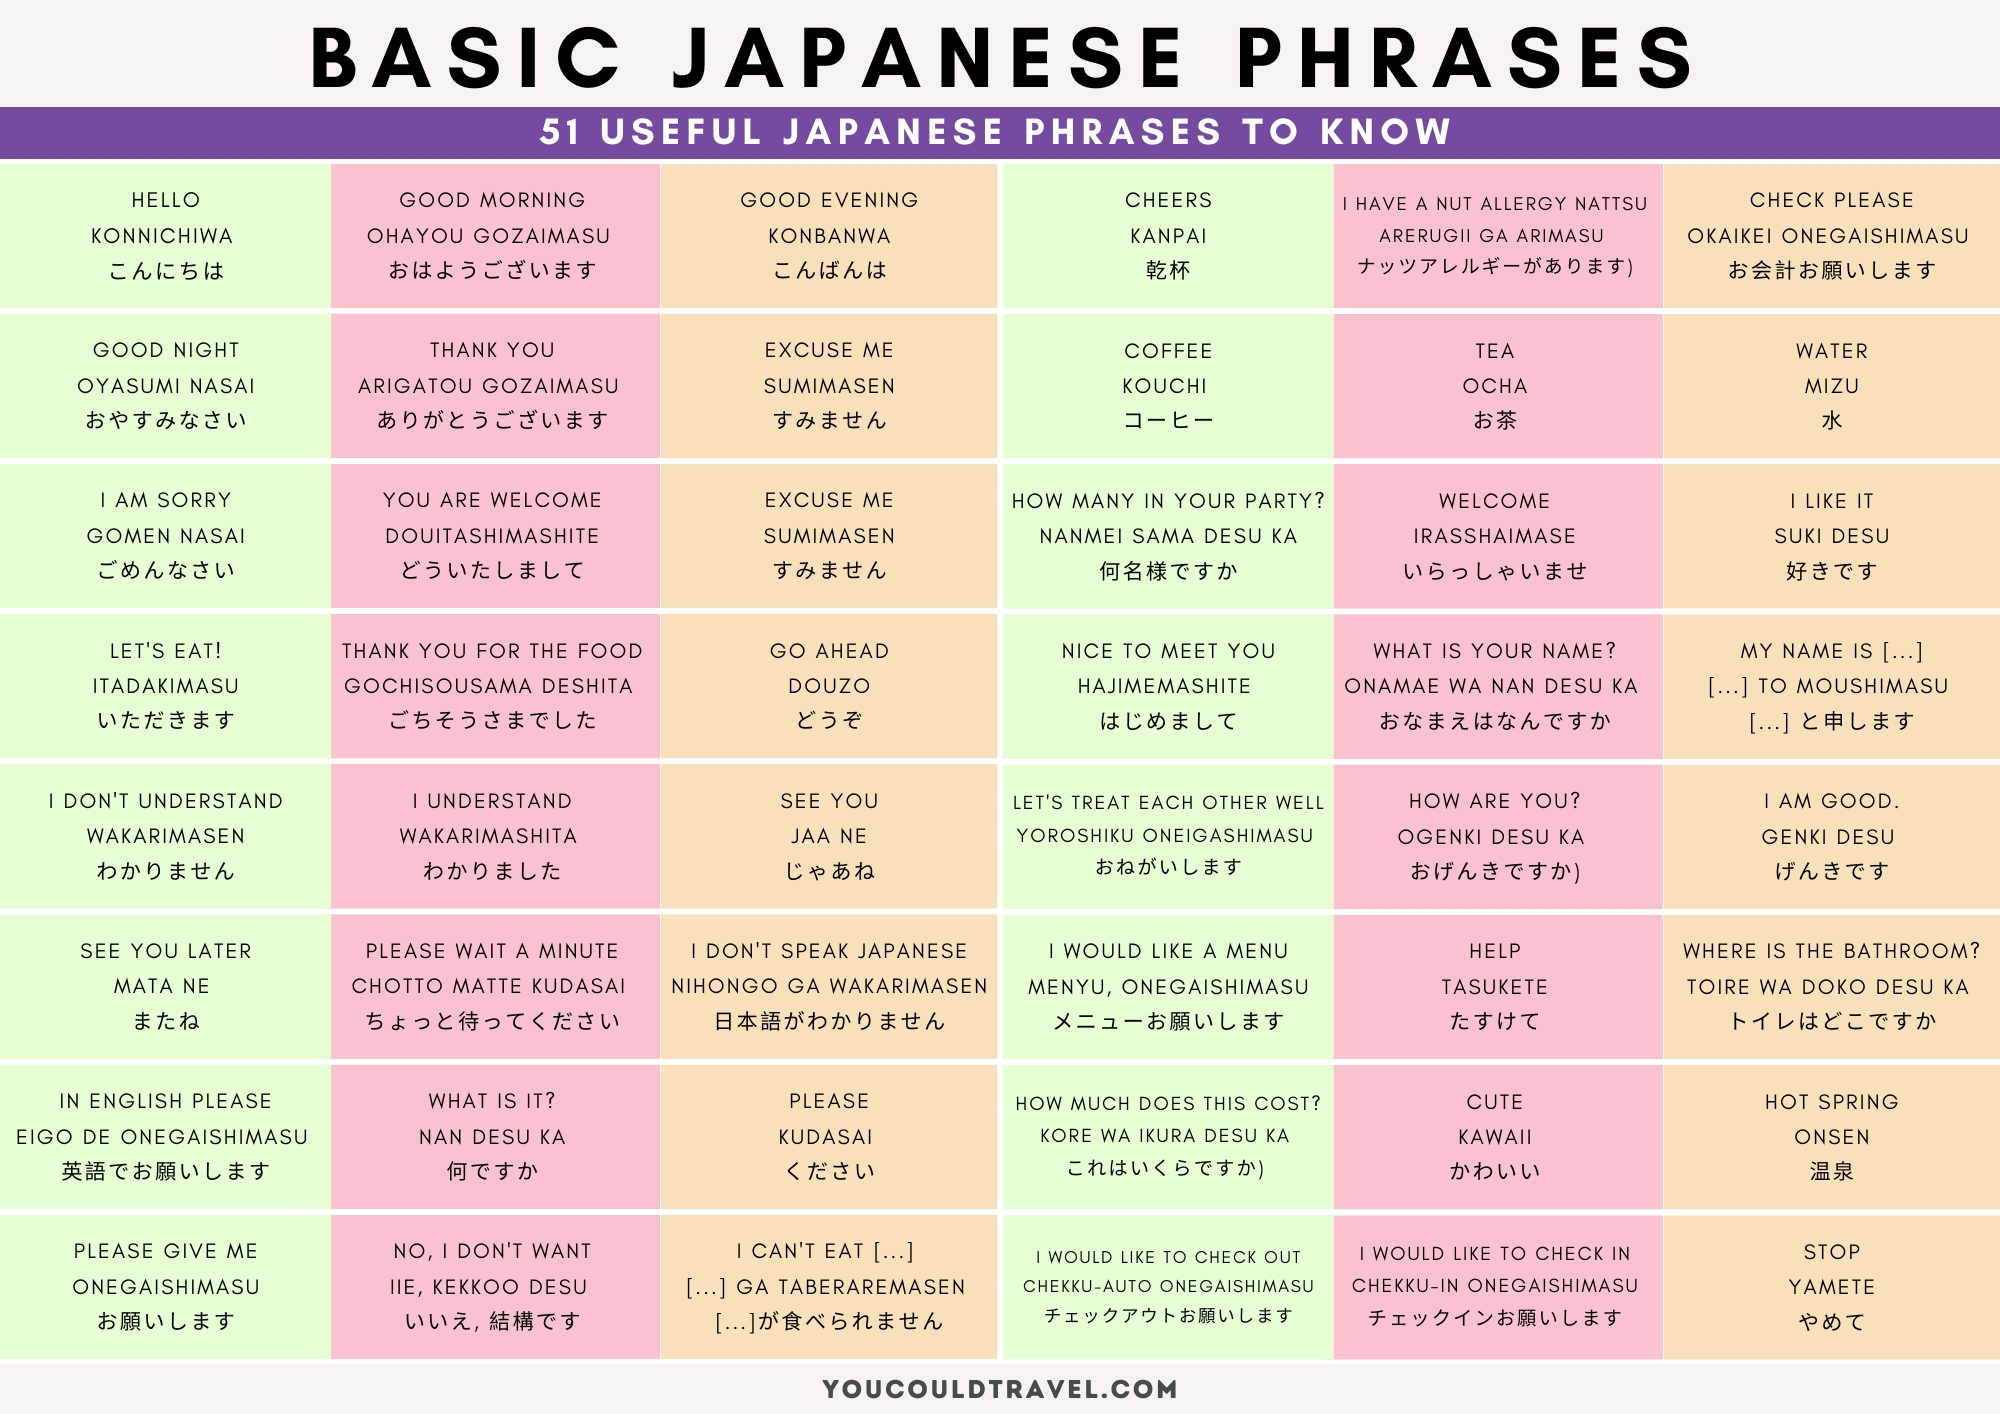 Basic Japanese phrases - 51 Japanese phrases to learn